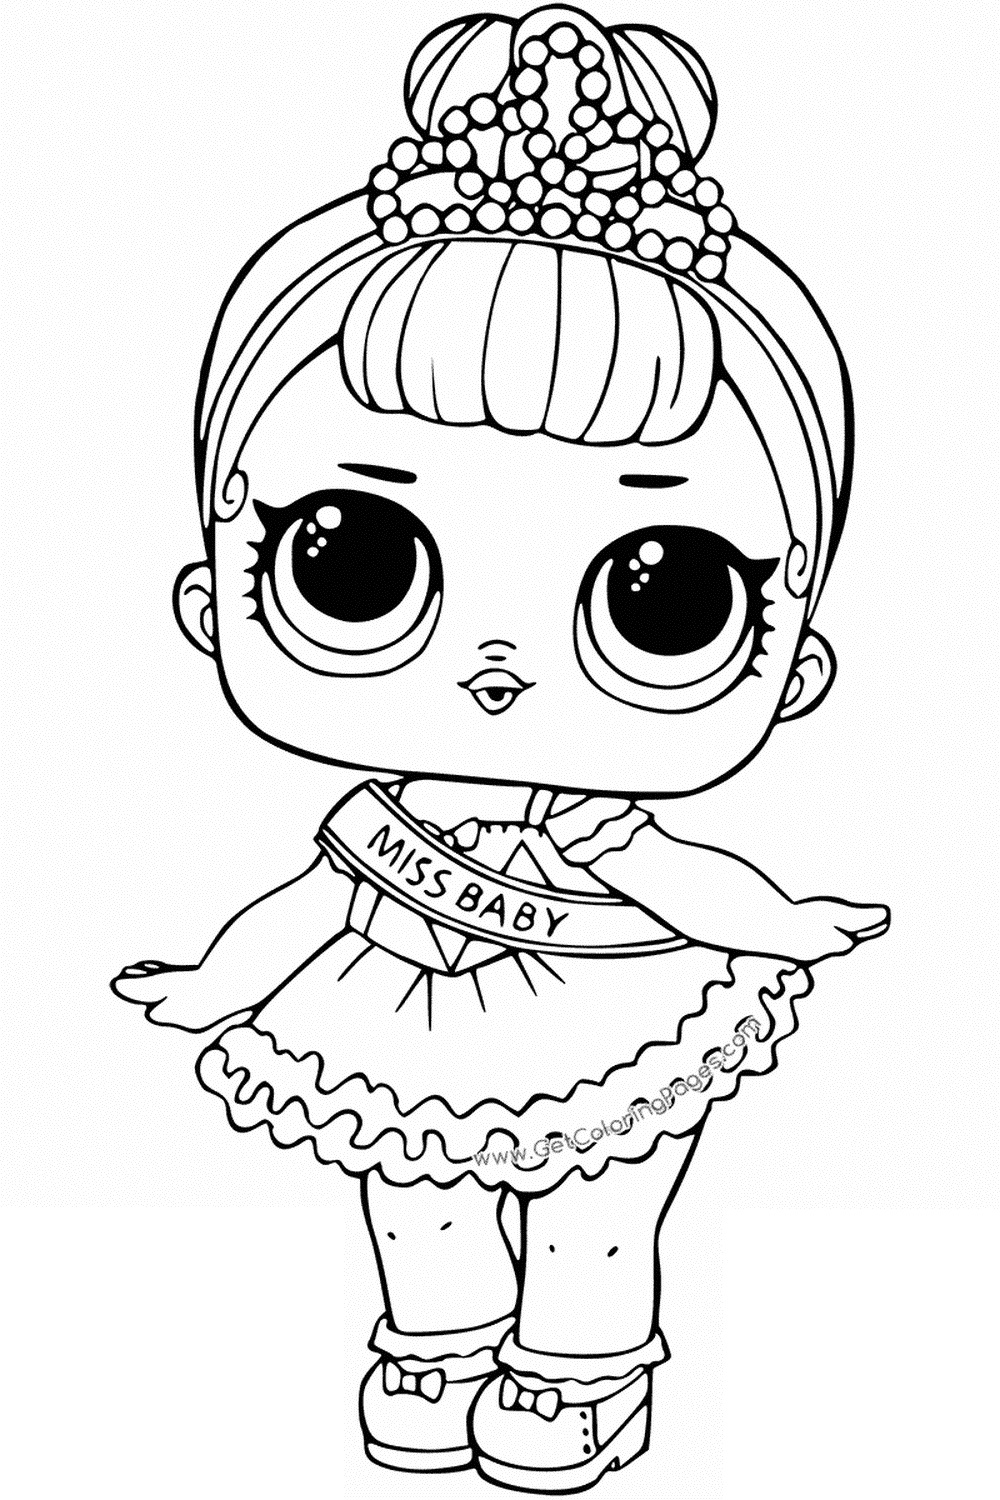 LOL Coloring Pages FREE Printable 137